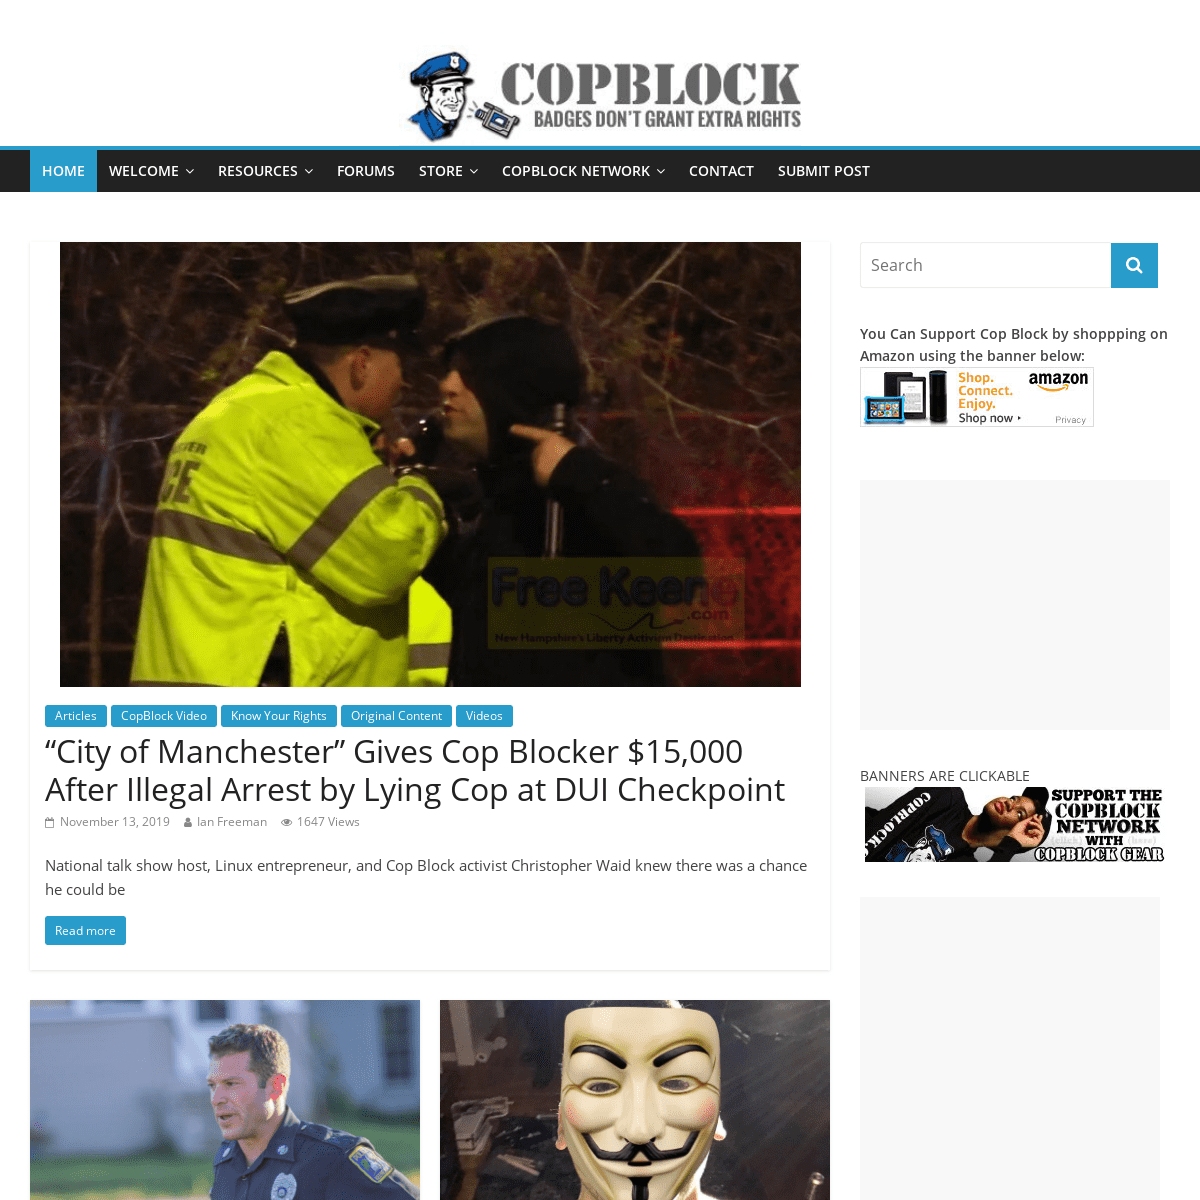 A complete backup of copblock.org